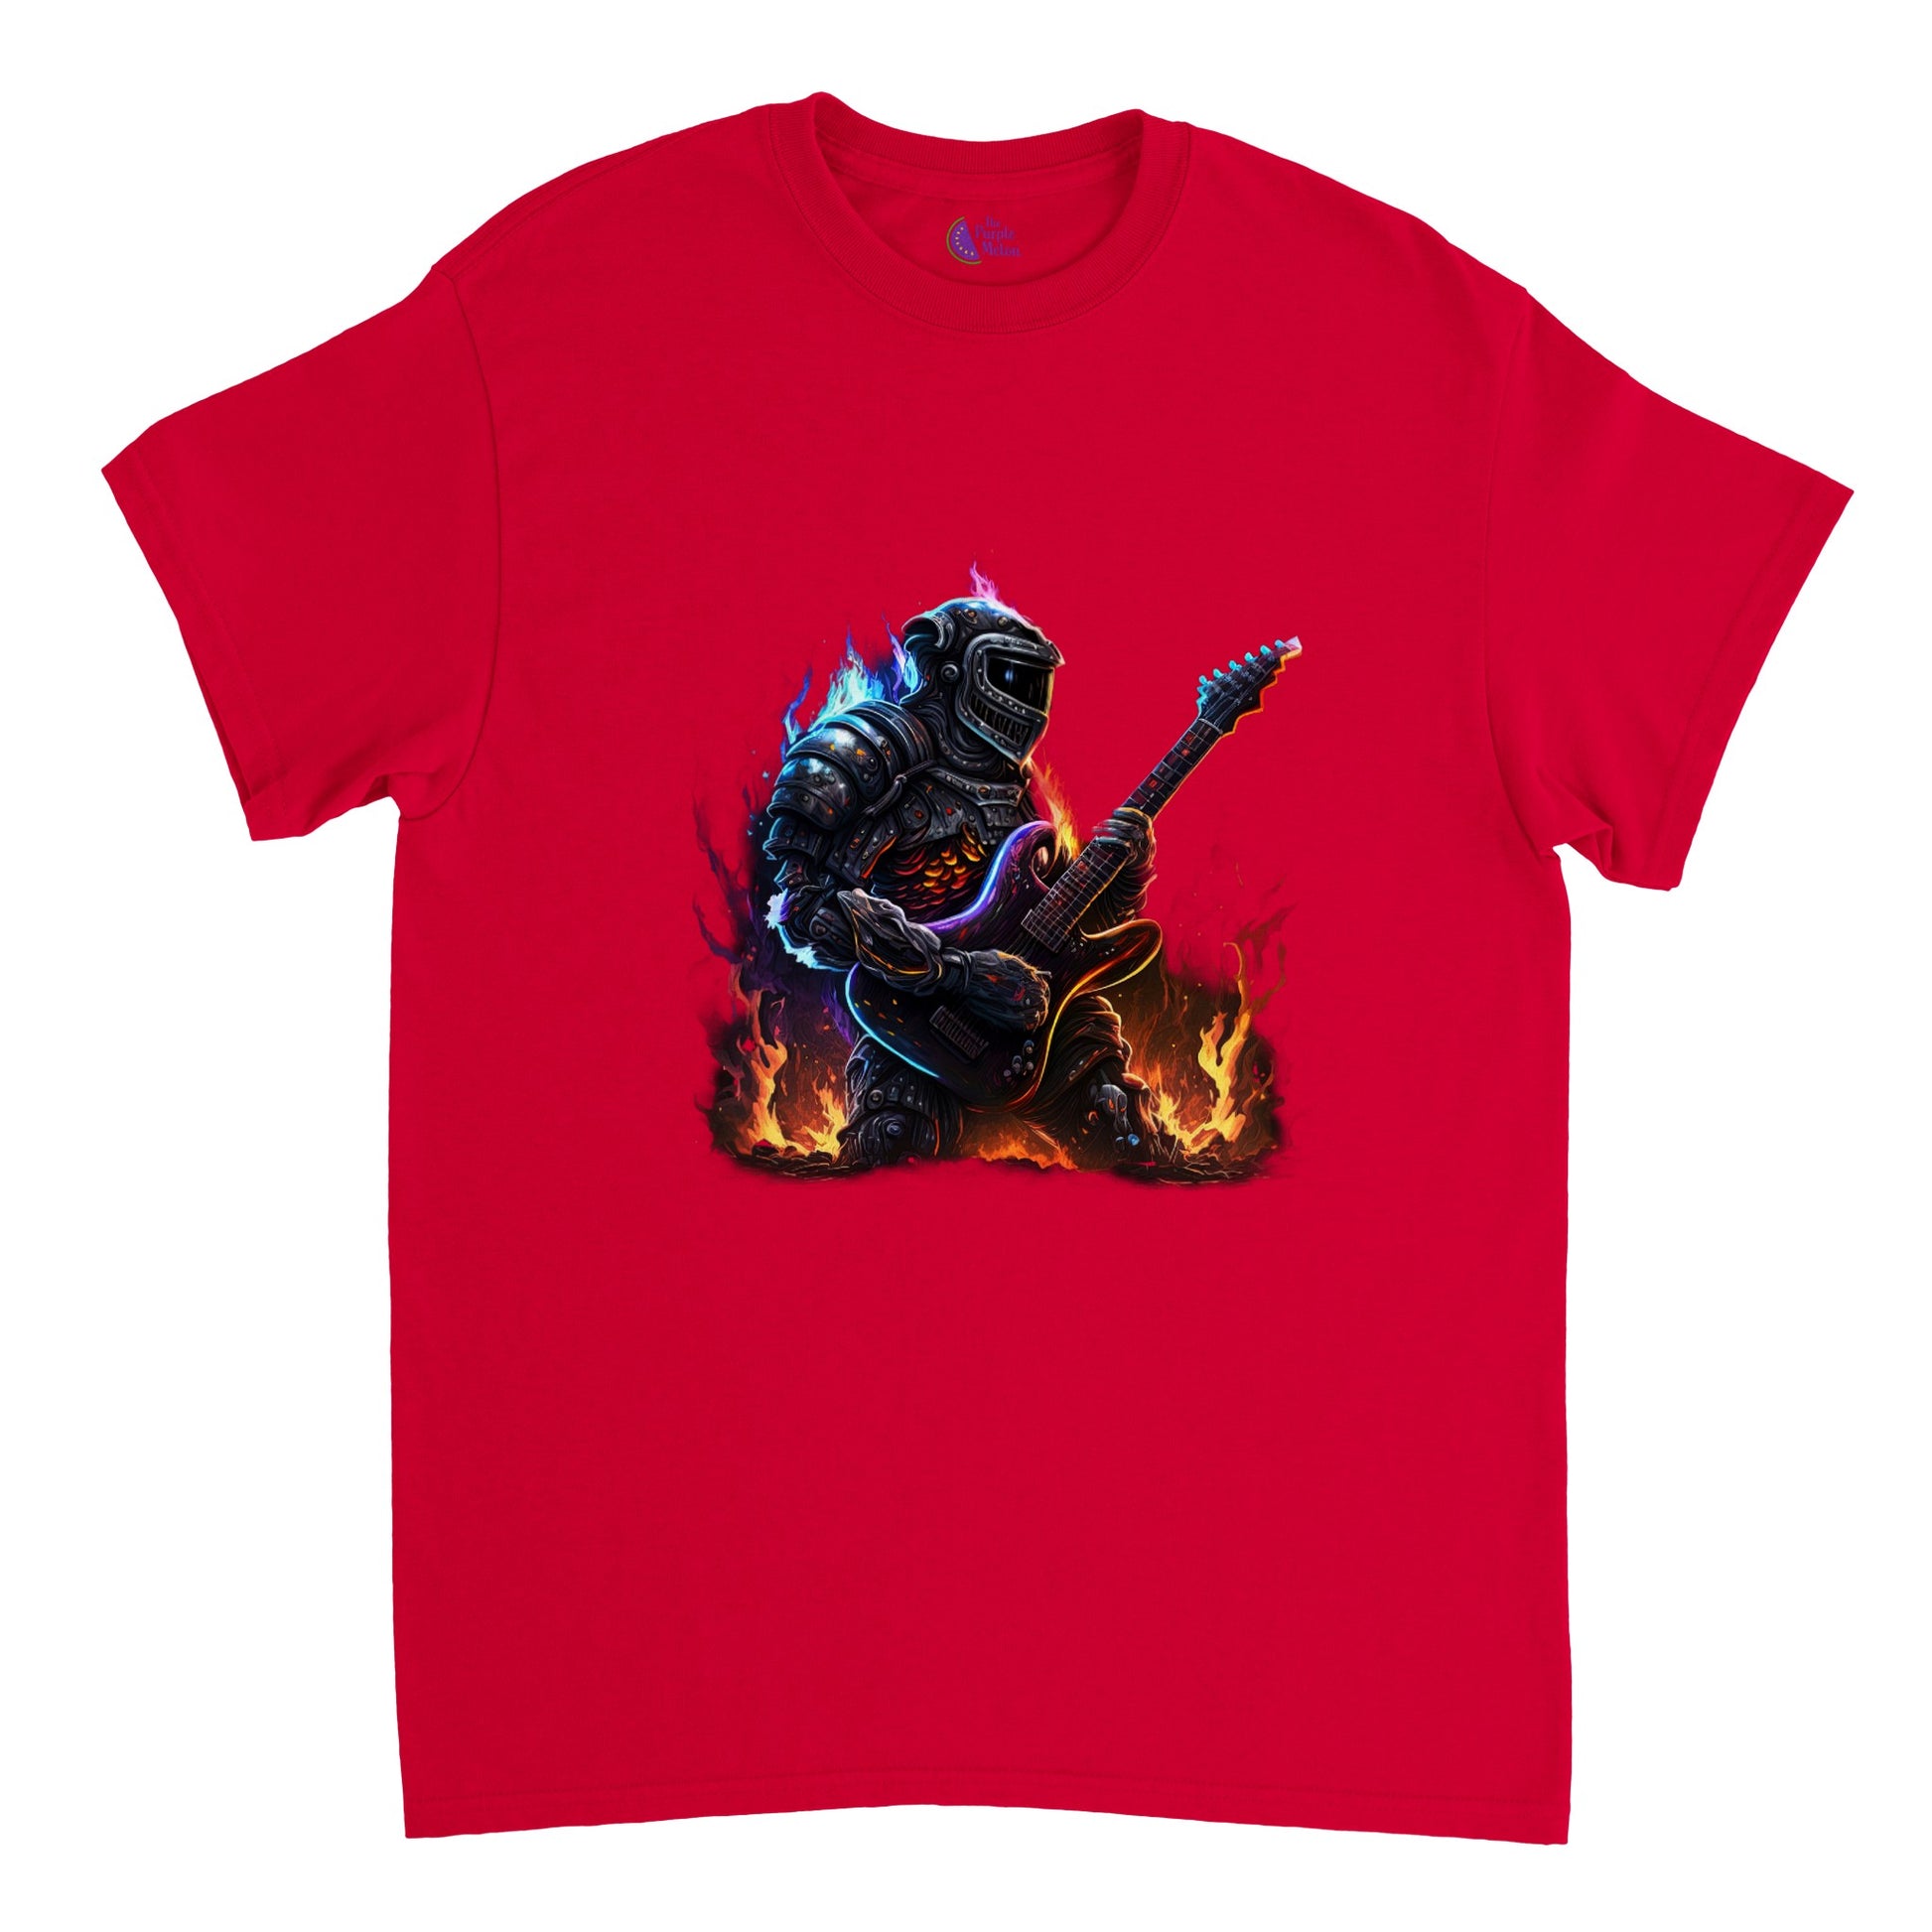 Red t-shirt with Space Robot on fire playing the guitar